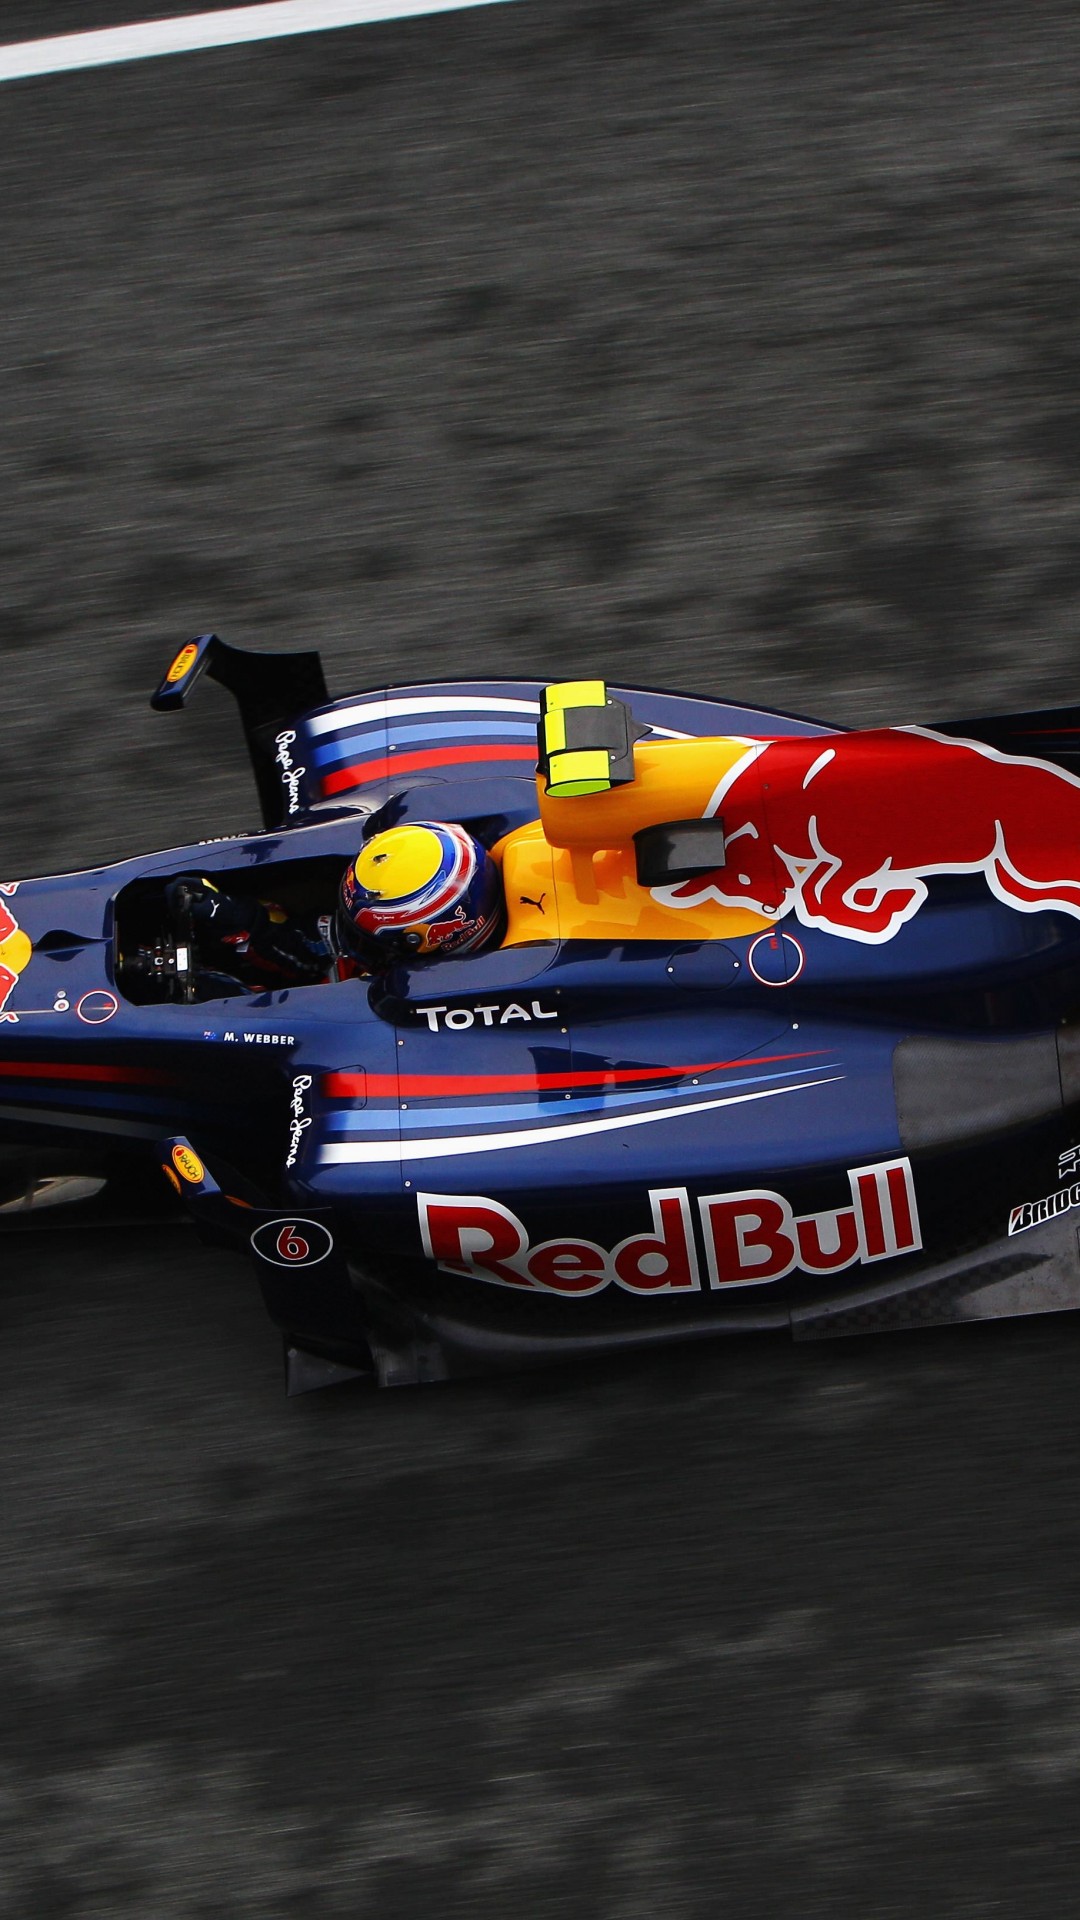 F1 Red Bull Team Wallpaper for SONY Xperia Z2